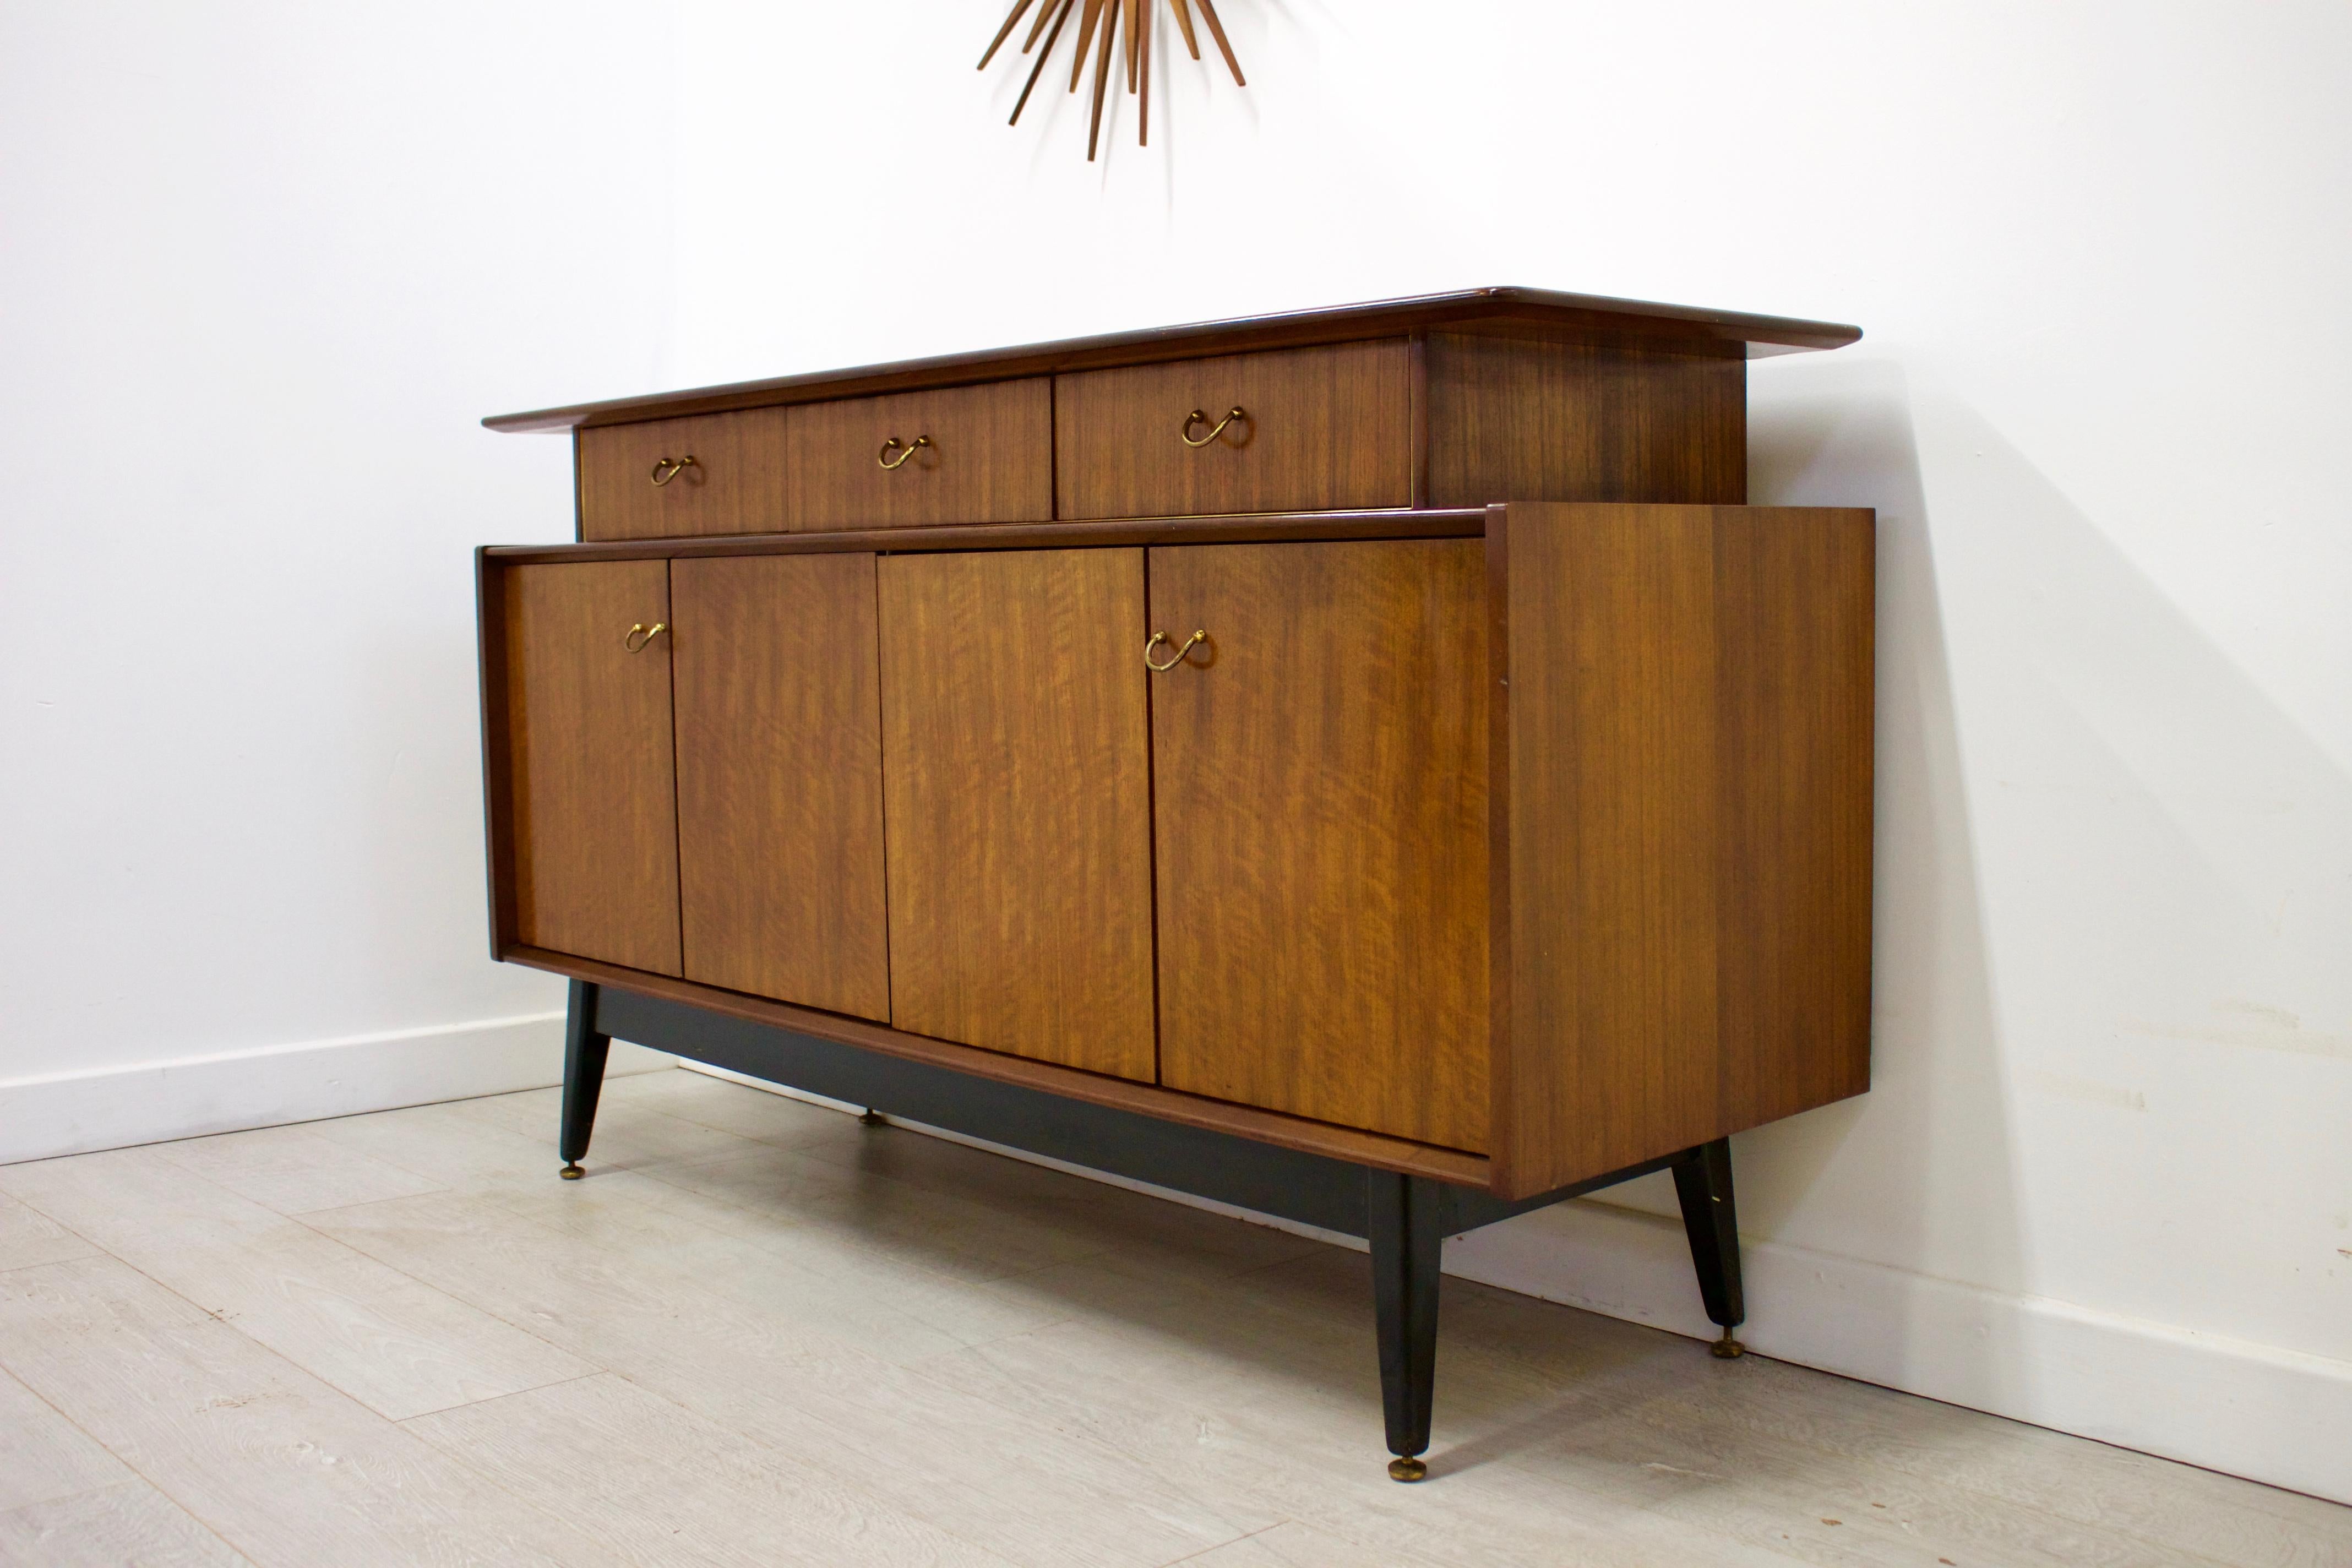 - Mid-Century Modern sideboard.
- Manufactured in the UK by G-Plan.
   